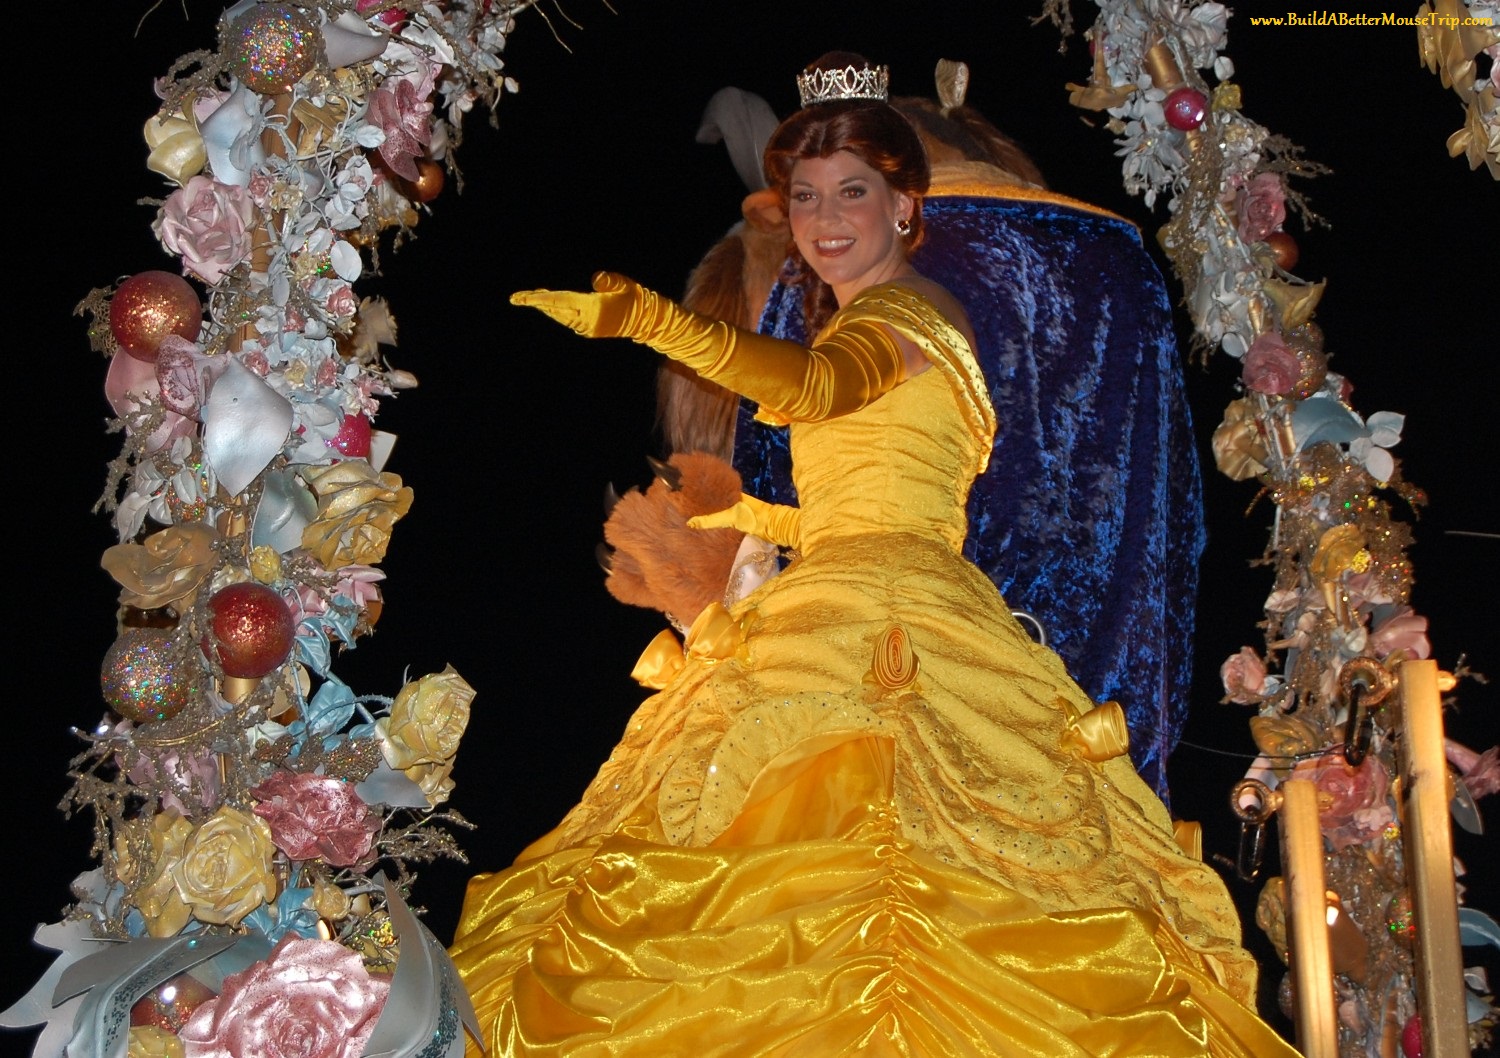 Disney's Beauty and the Beast sequel book finds Belle in the